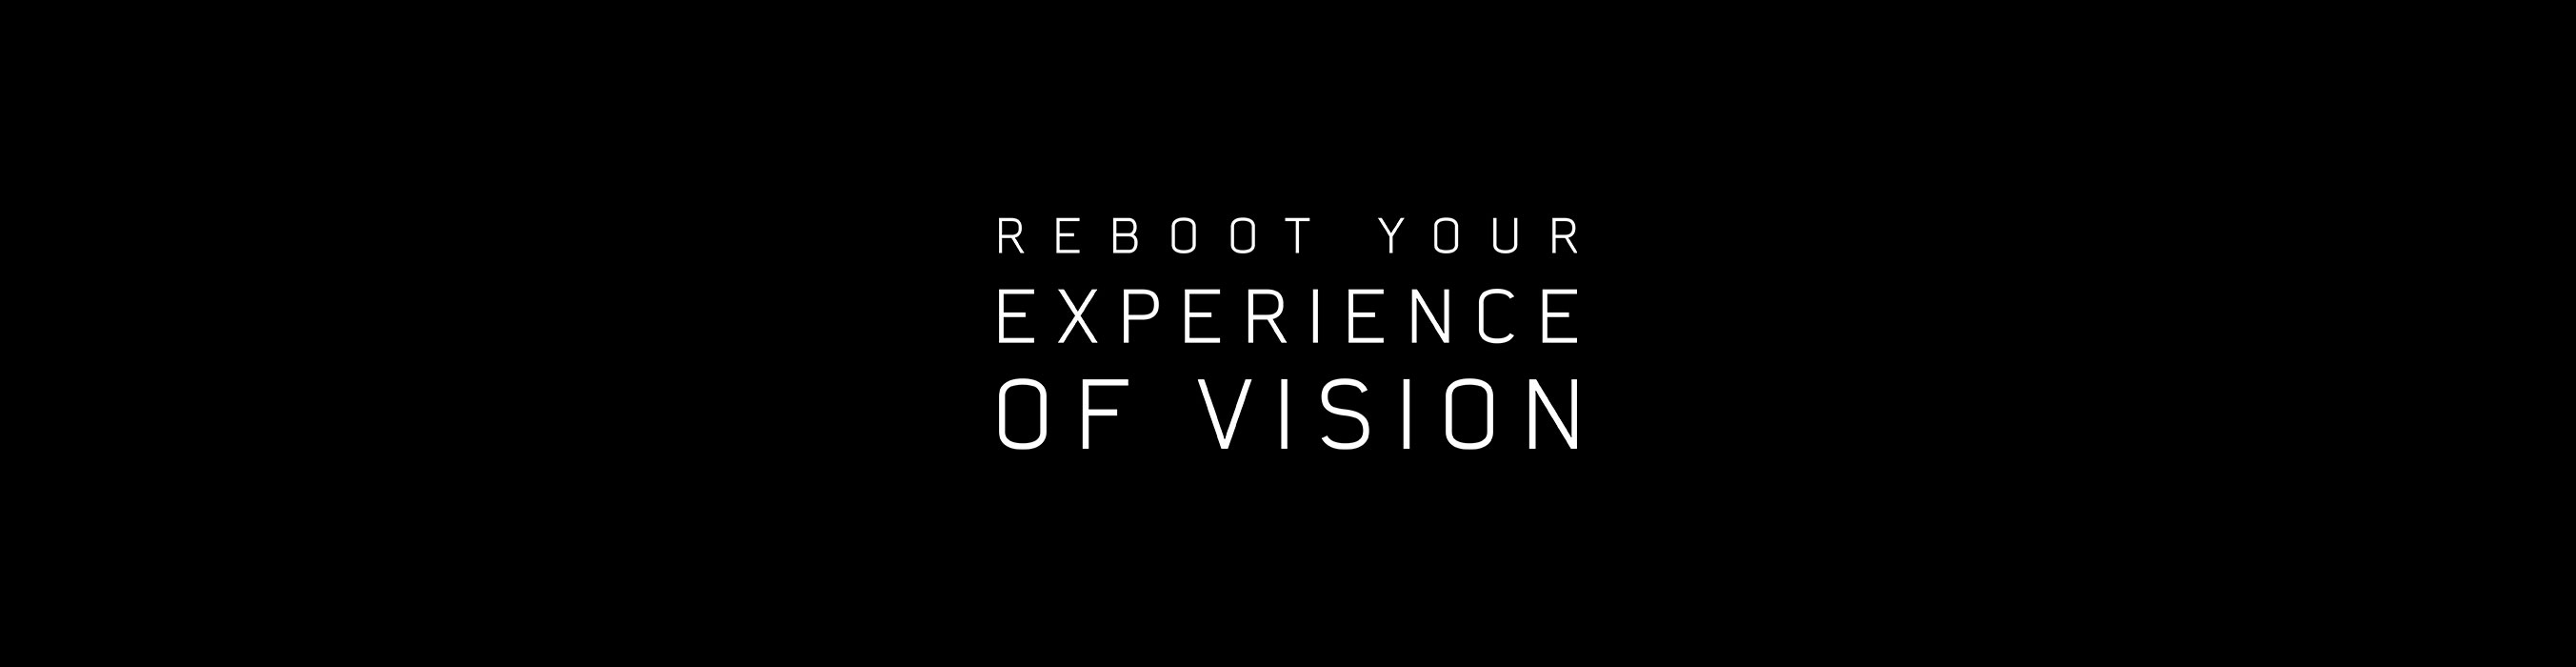 RX LAB - Reboot your experience of vision